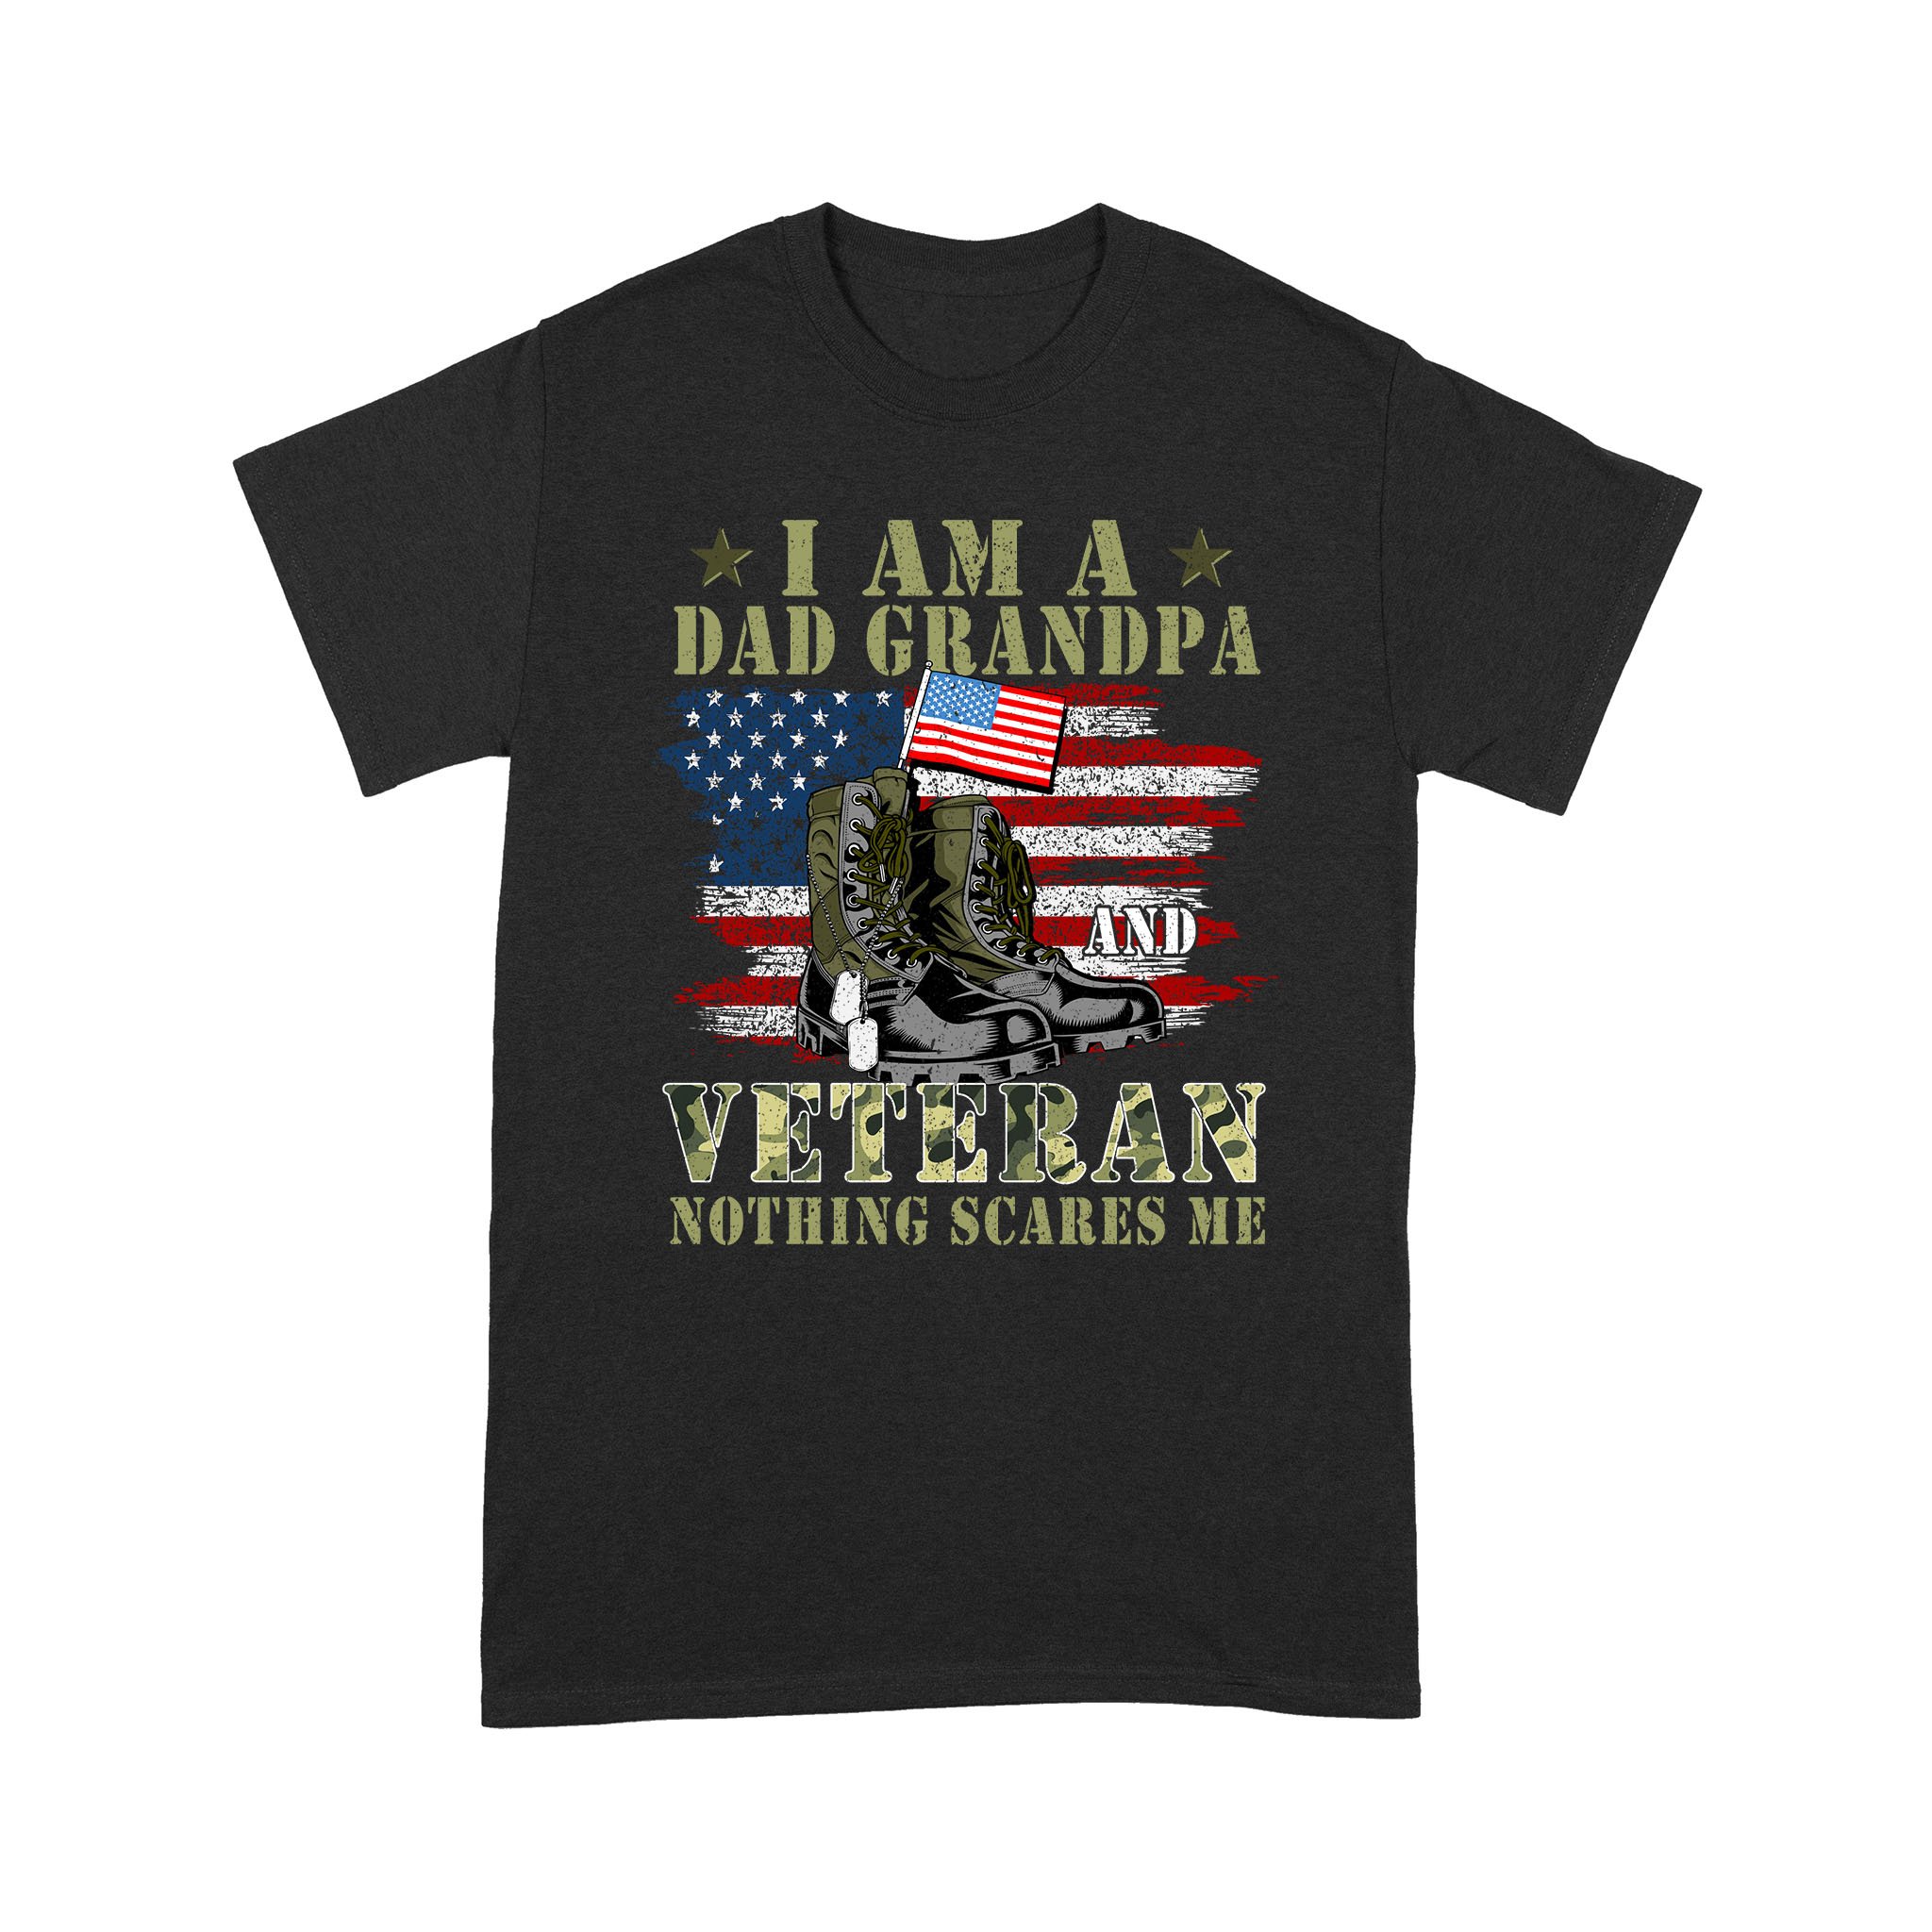 I Am A Dad Grandpa And Veteran Nothing Scares Me – Standard T-Shirt